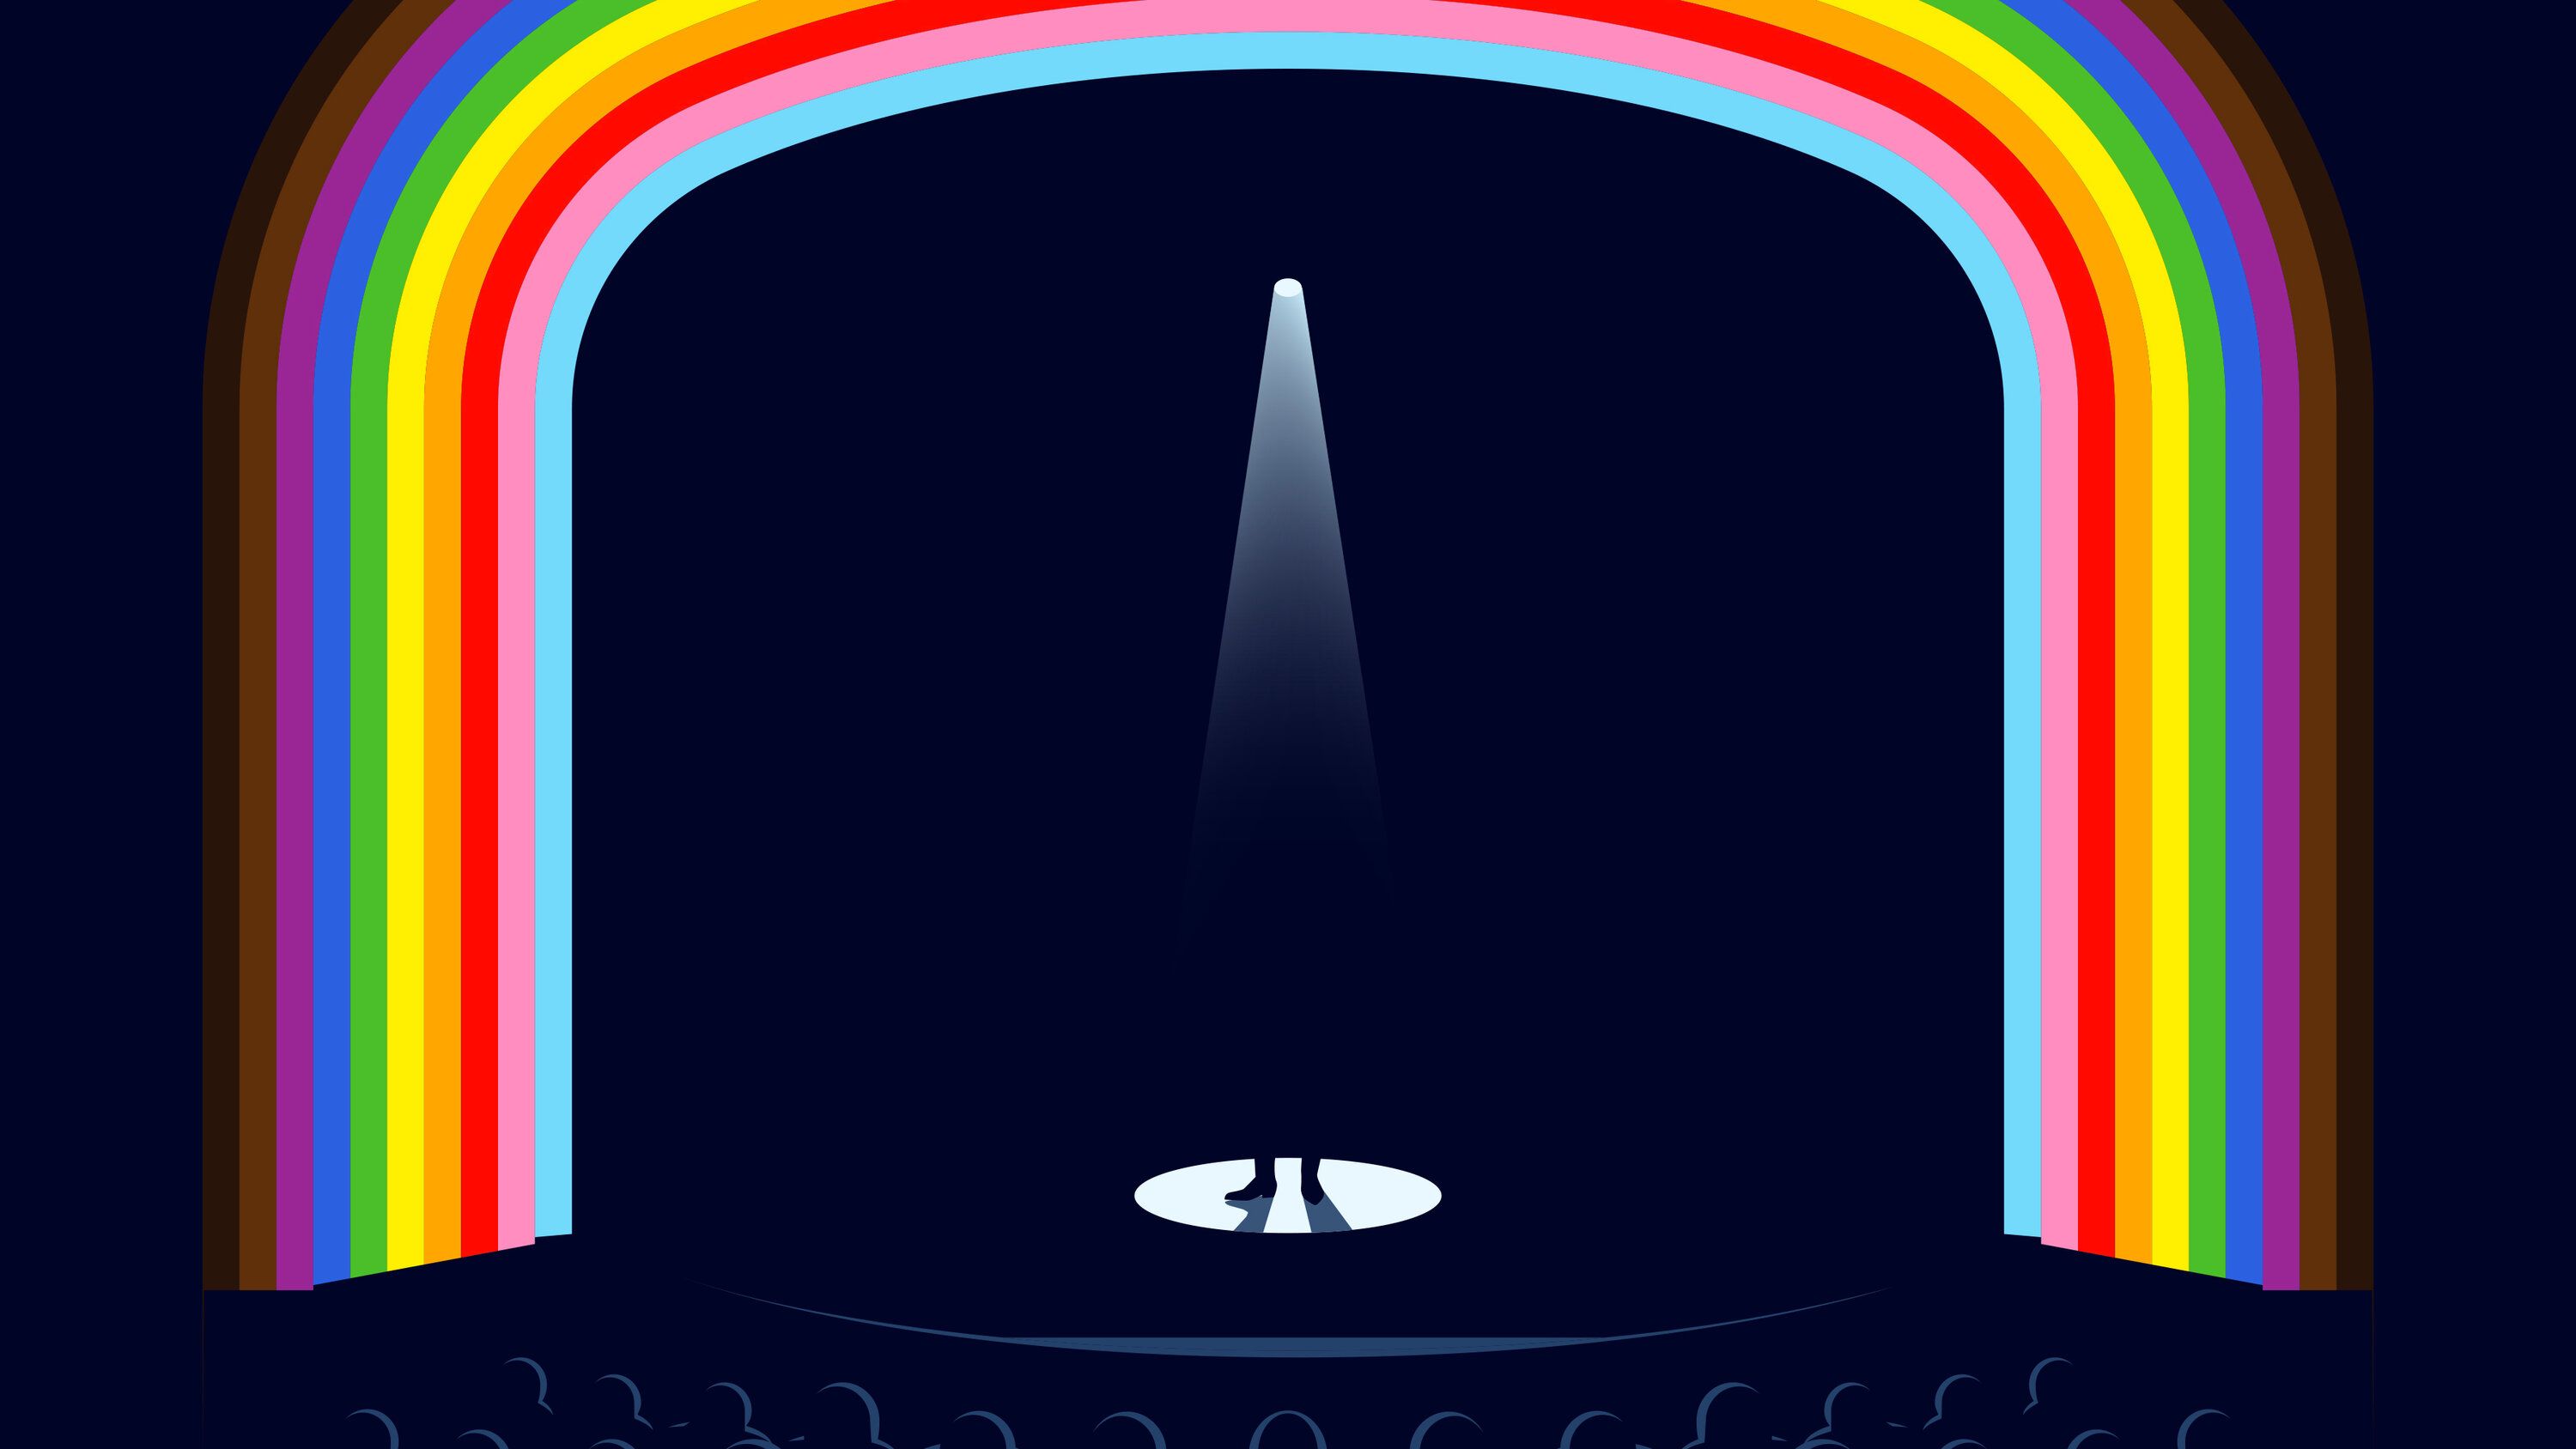 A person standing under a spotlight on a stage with a rainbow arching over the stage. - Gay